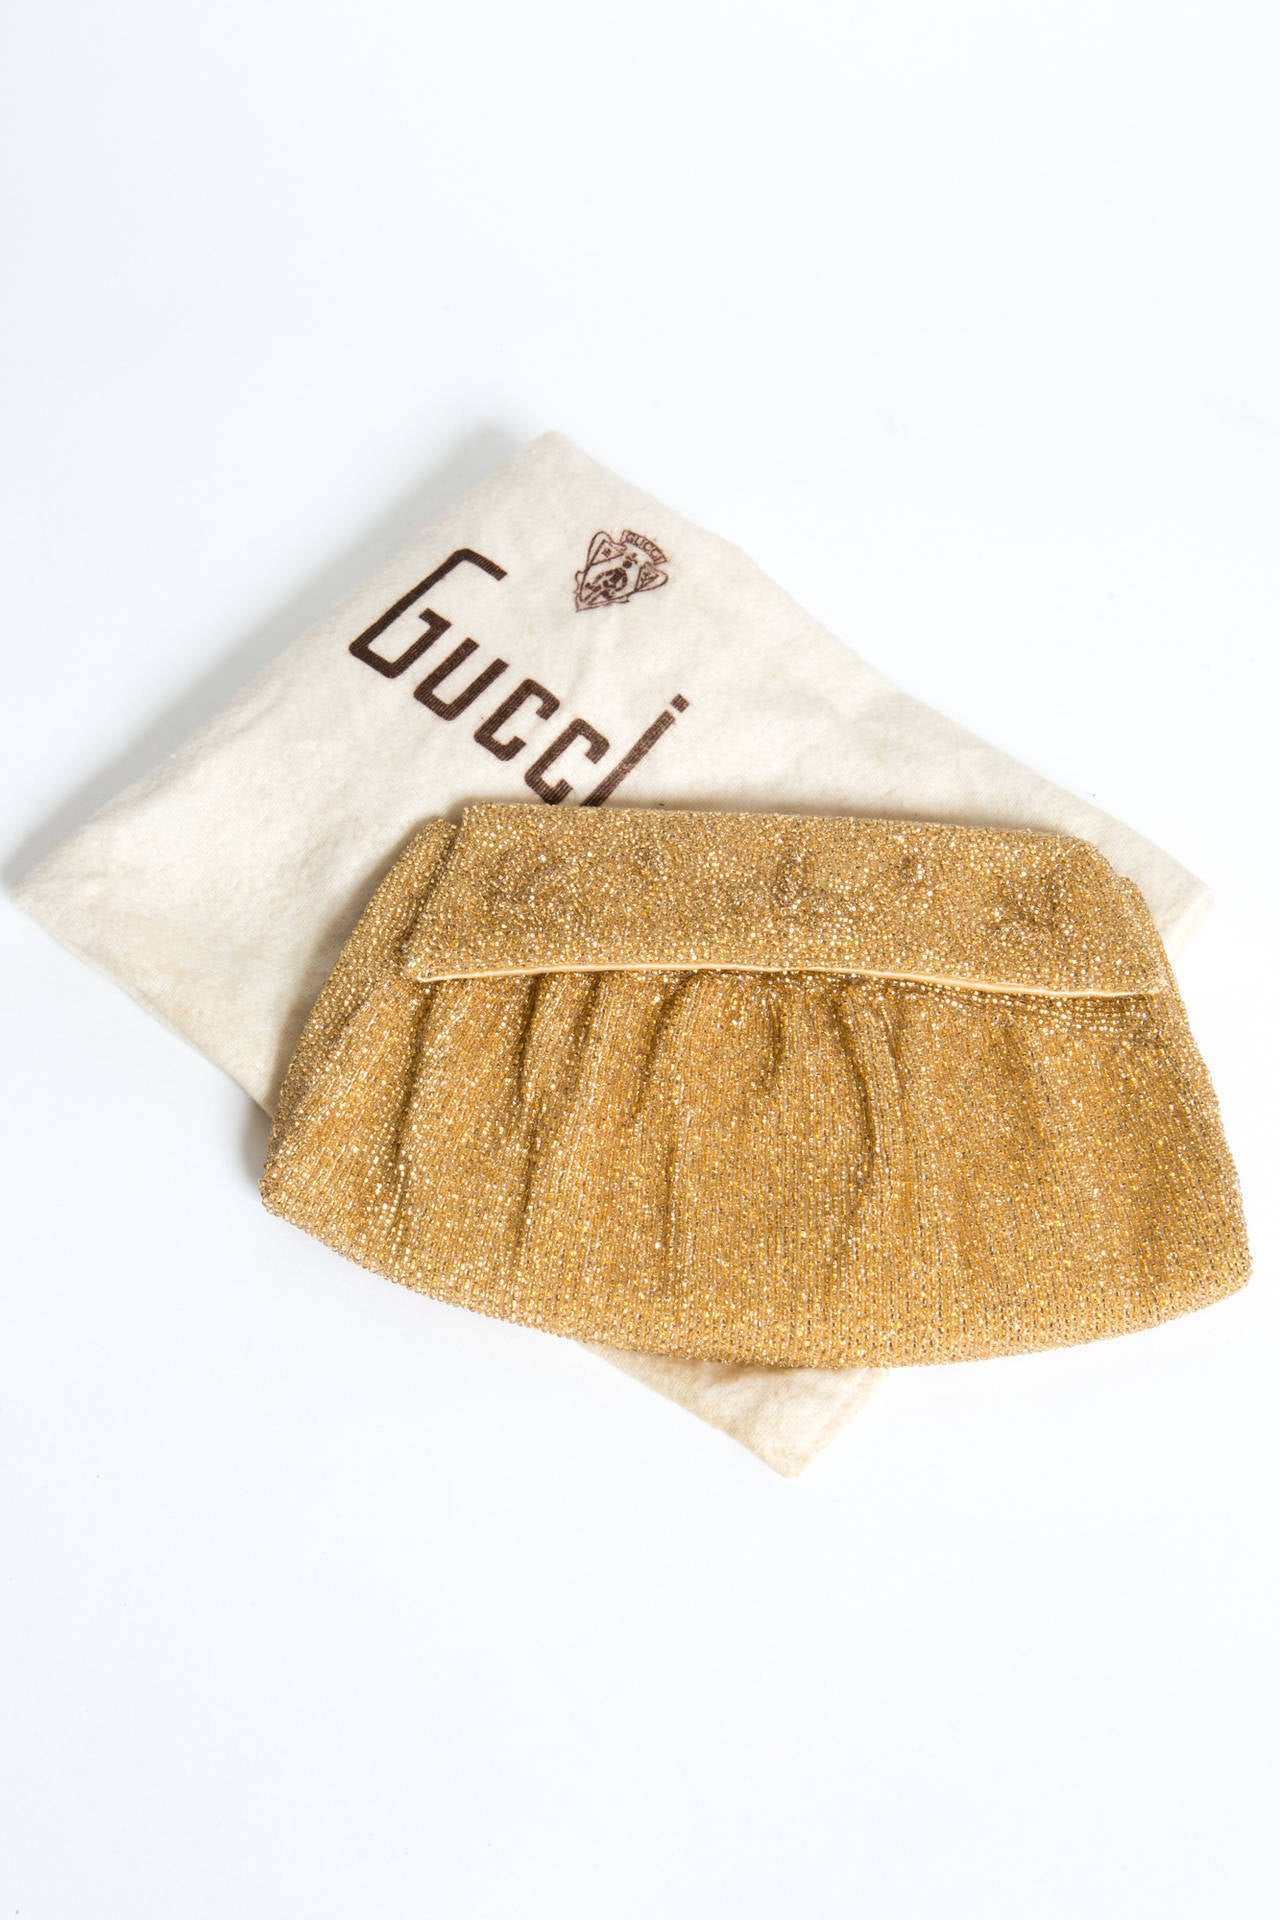 1970s Gucci rare evening clutch featuring gold-tone small beads, gets a front snap opening and an inside silk lining ,with a small pocket.
In excellent vintage condition. Made in Italy.
We guarantee you will receive this gorgeous clutch as